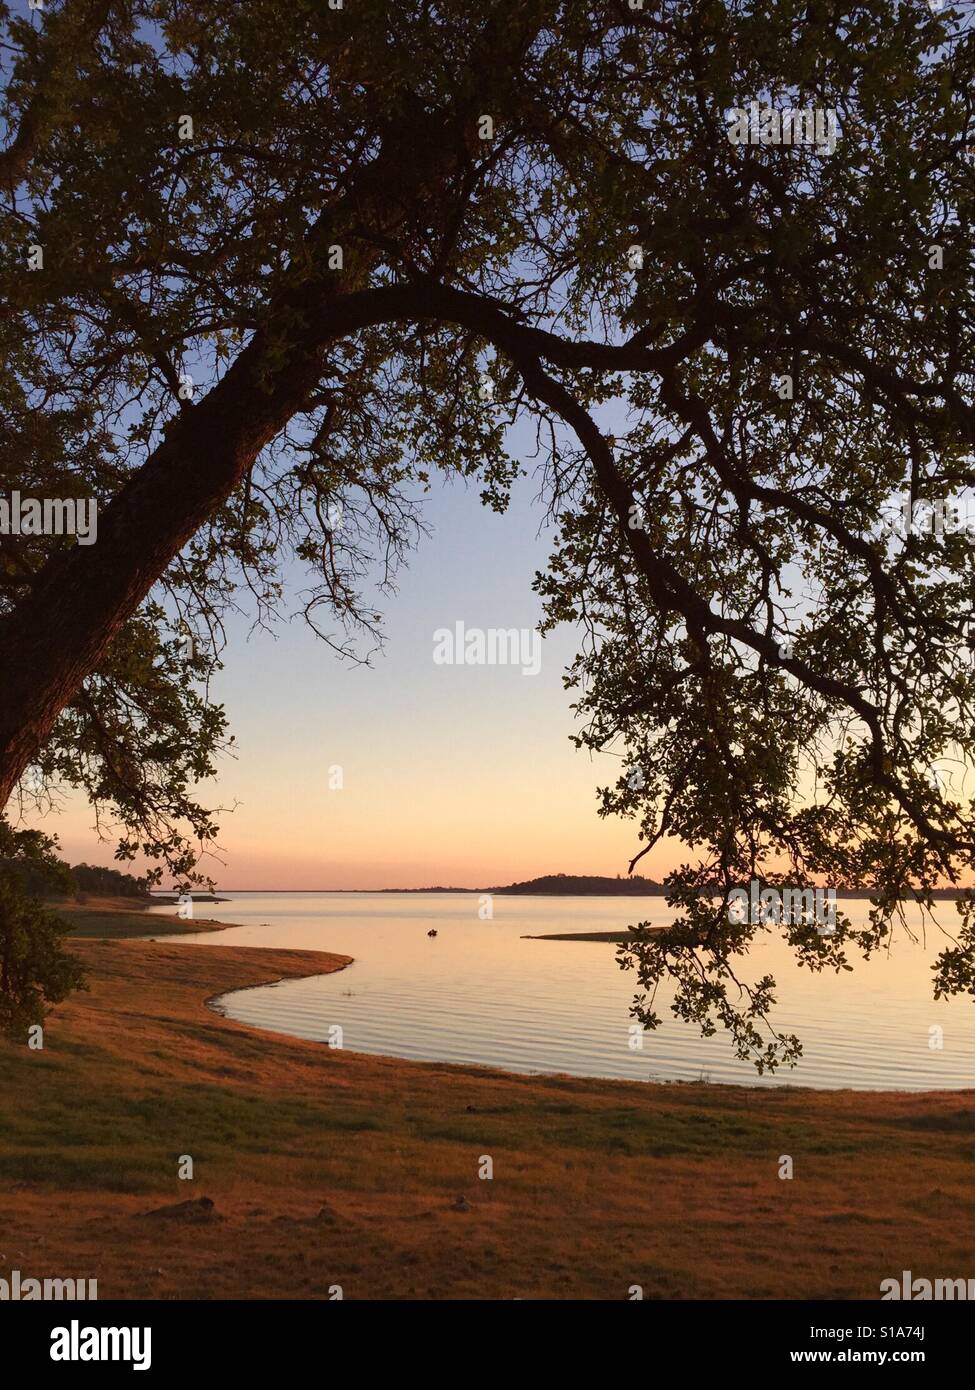 Looking at sunset through a tree on a calm lake in the spring. Folsom Lake, California. Stock Photo